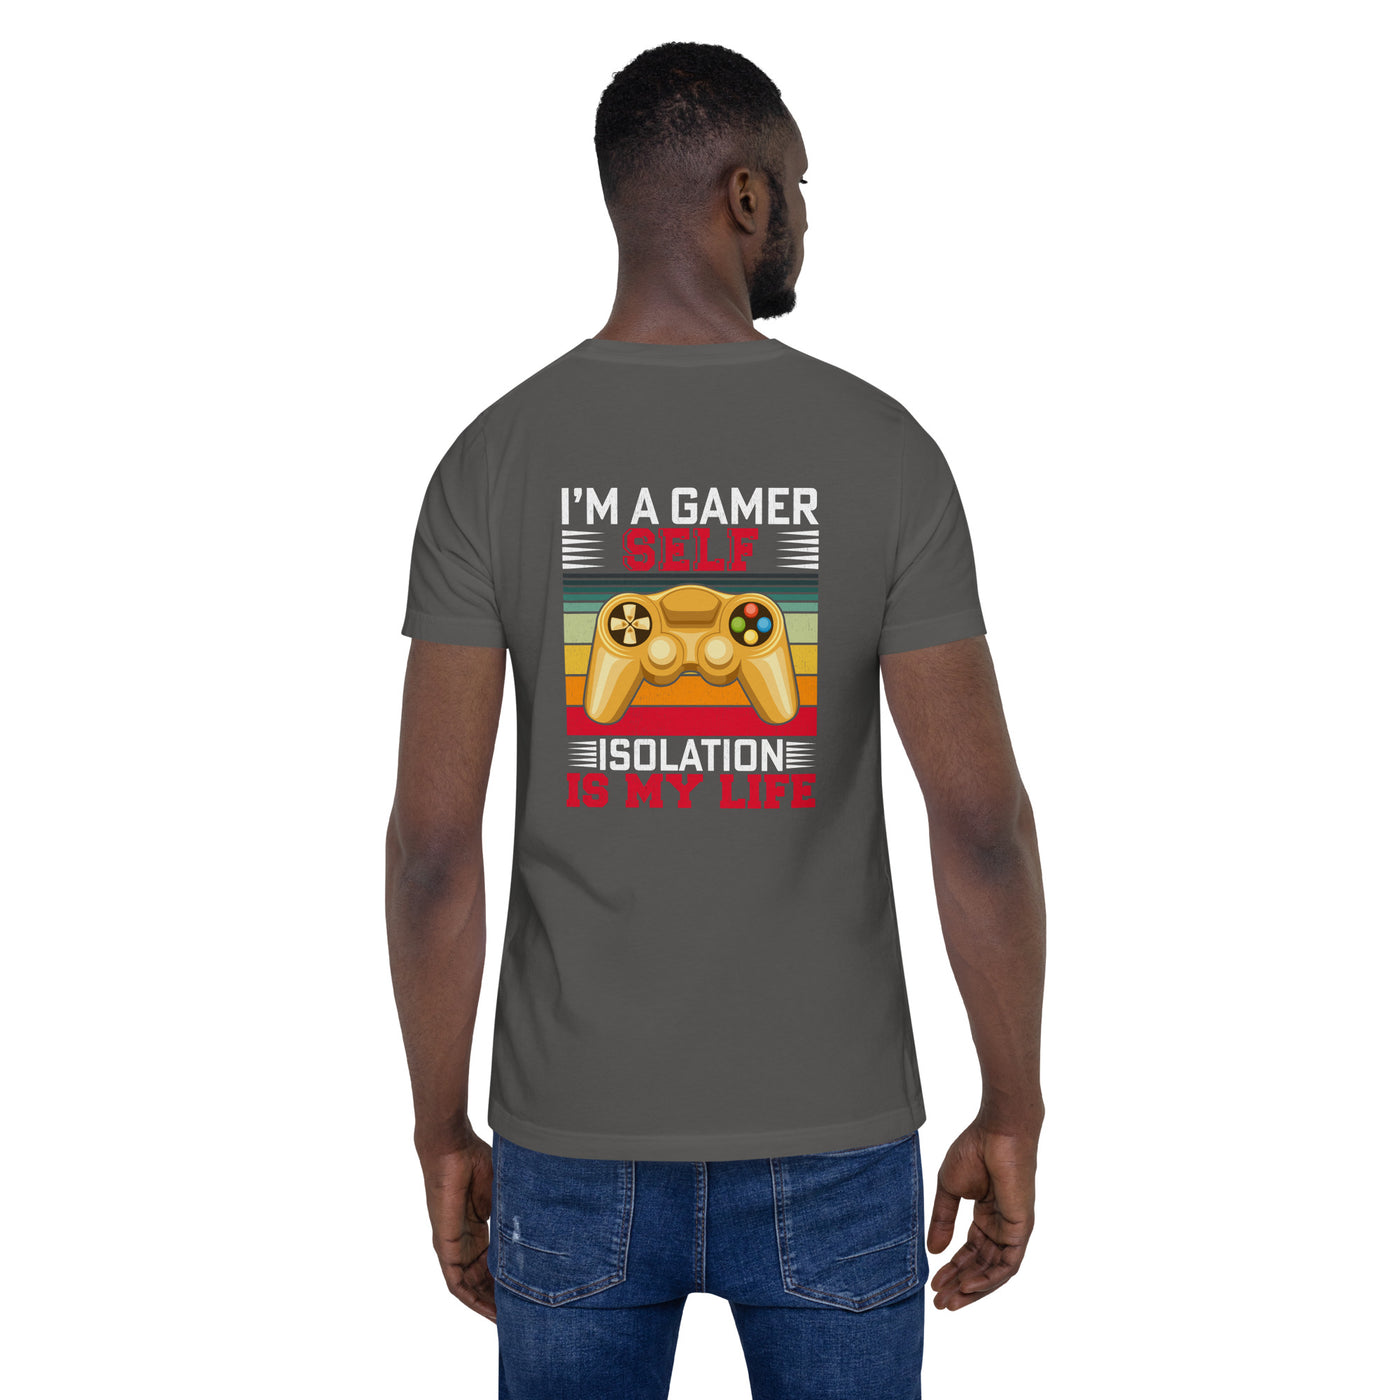 I am a Gamer; Self-isolation is my life - Unisex t-shirt ( Back Print )